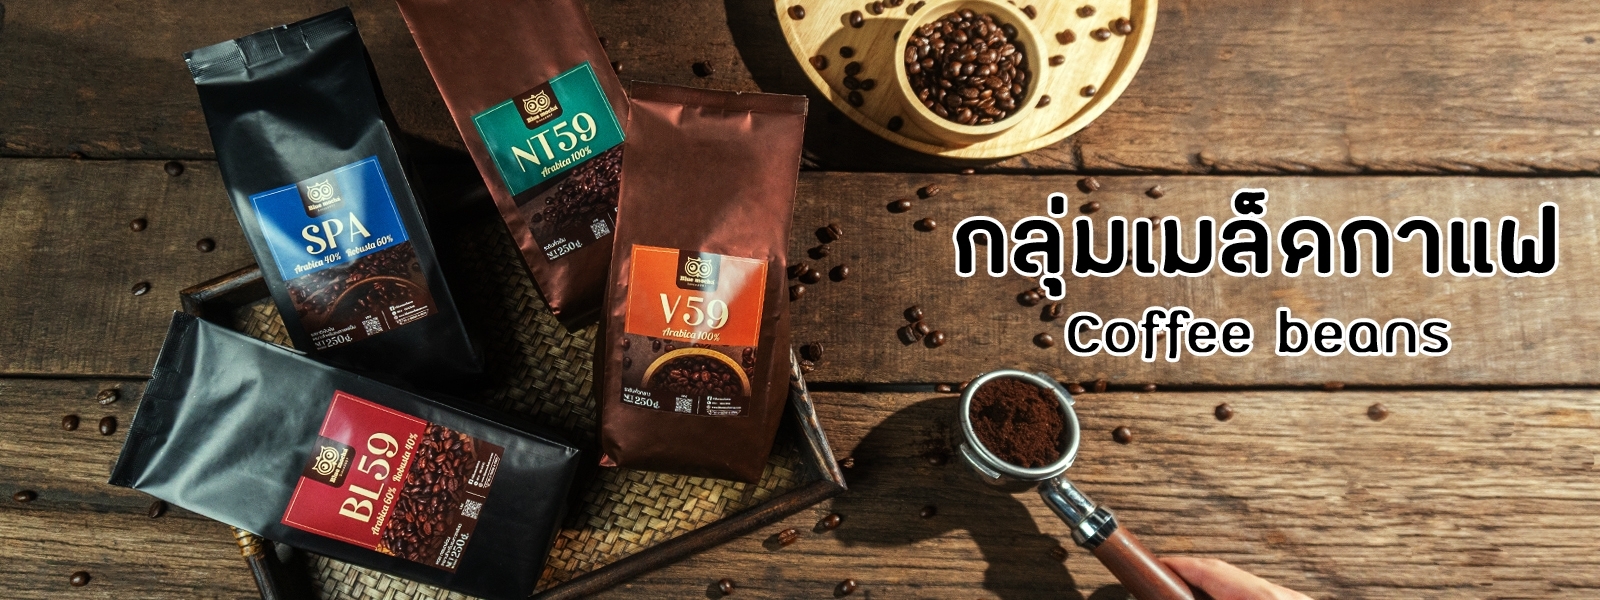 coffee beans products